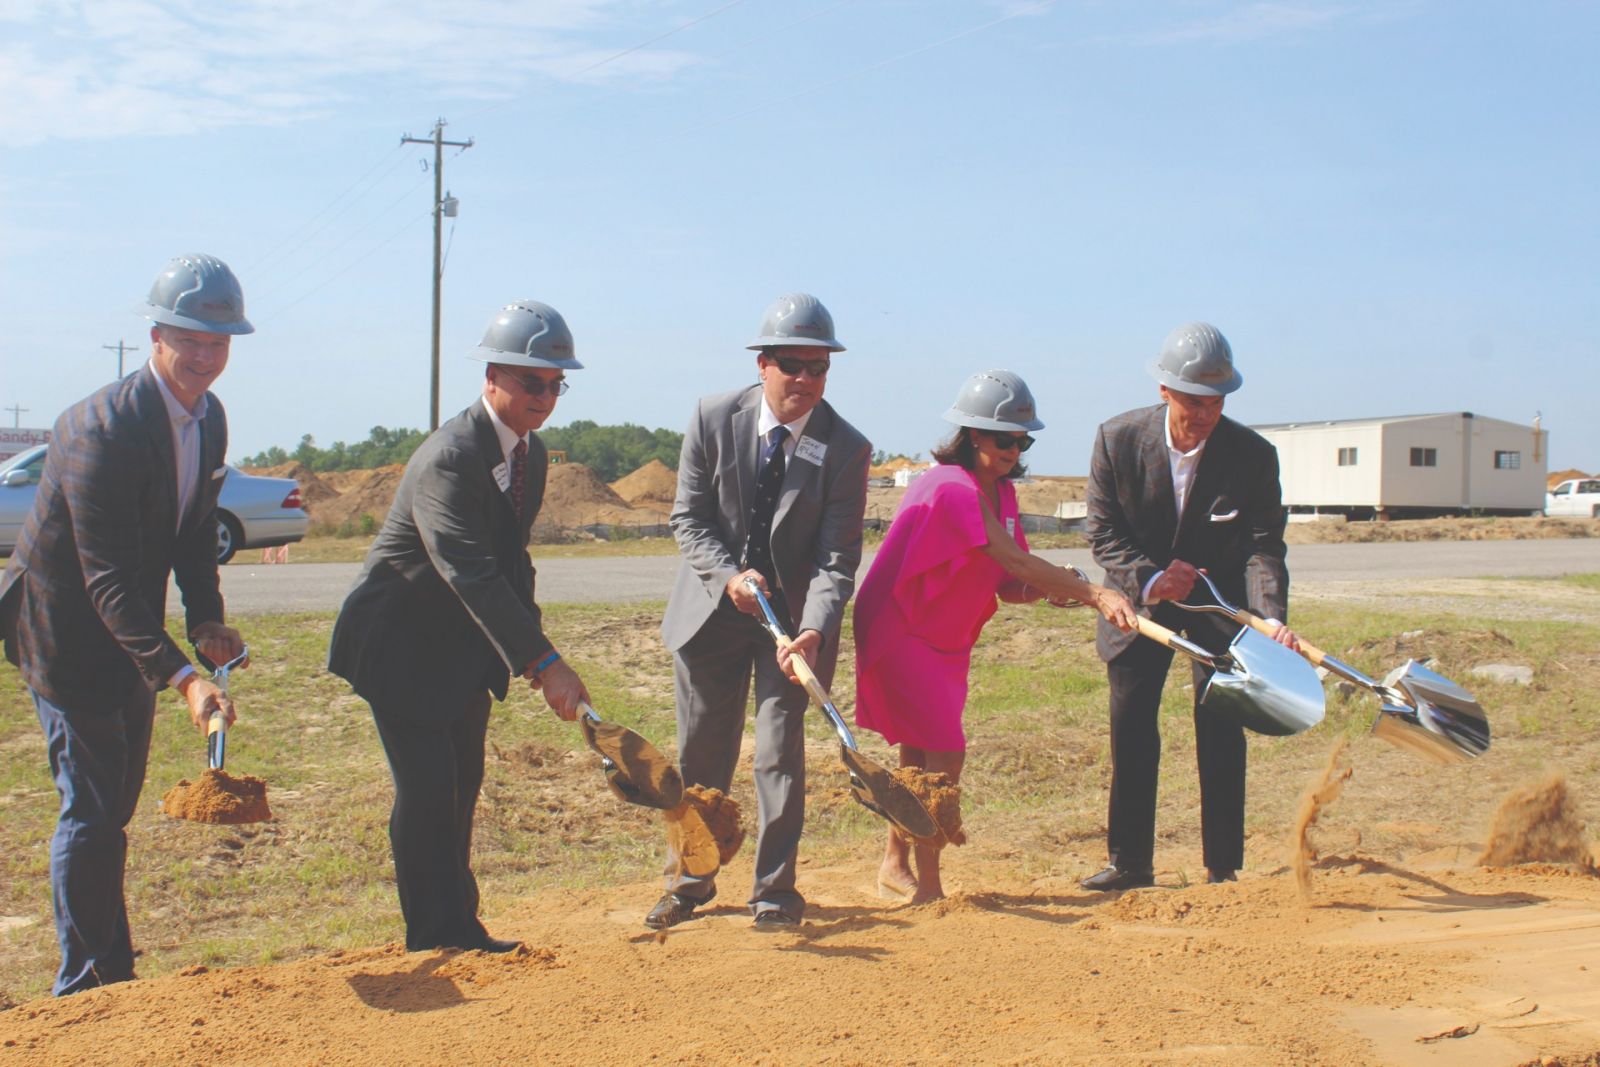 Groundbreaking for the largest expandable speculative building ever constructed in central S.C. took place June 21 at the Sandy Run Industrial Park. (Photo/Christina Lee Knauss)